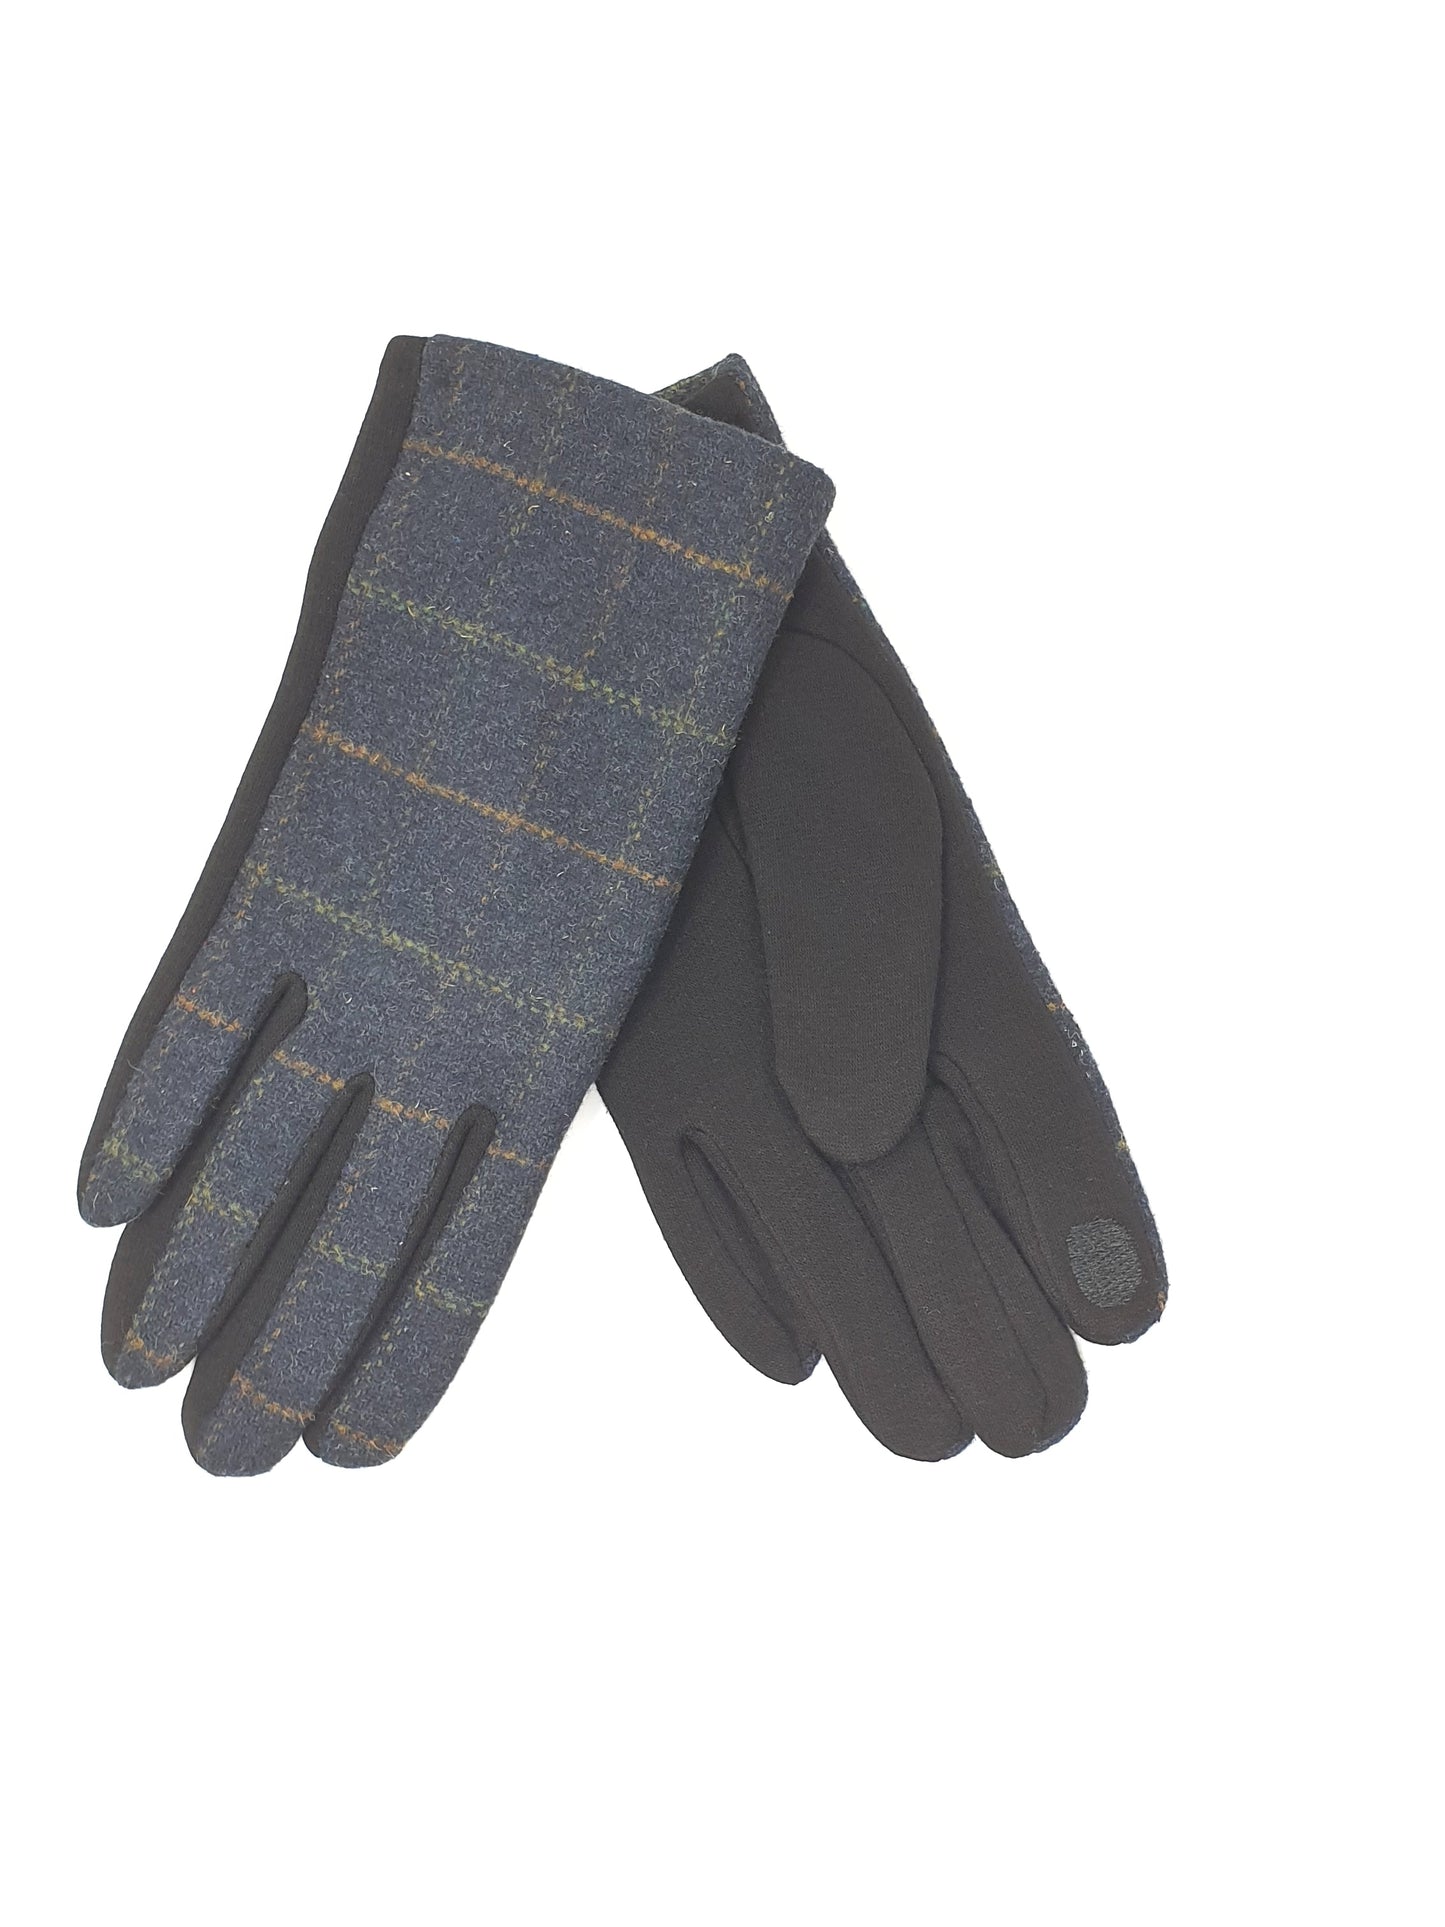 Mens Traditional Tartan gloves, One Size, Touchscreen Compatible